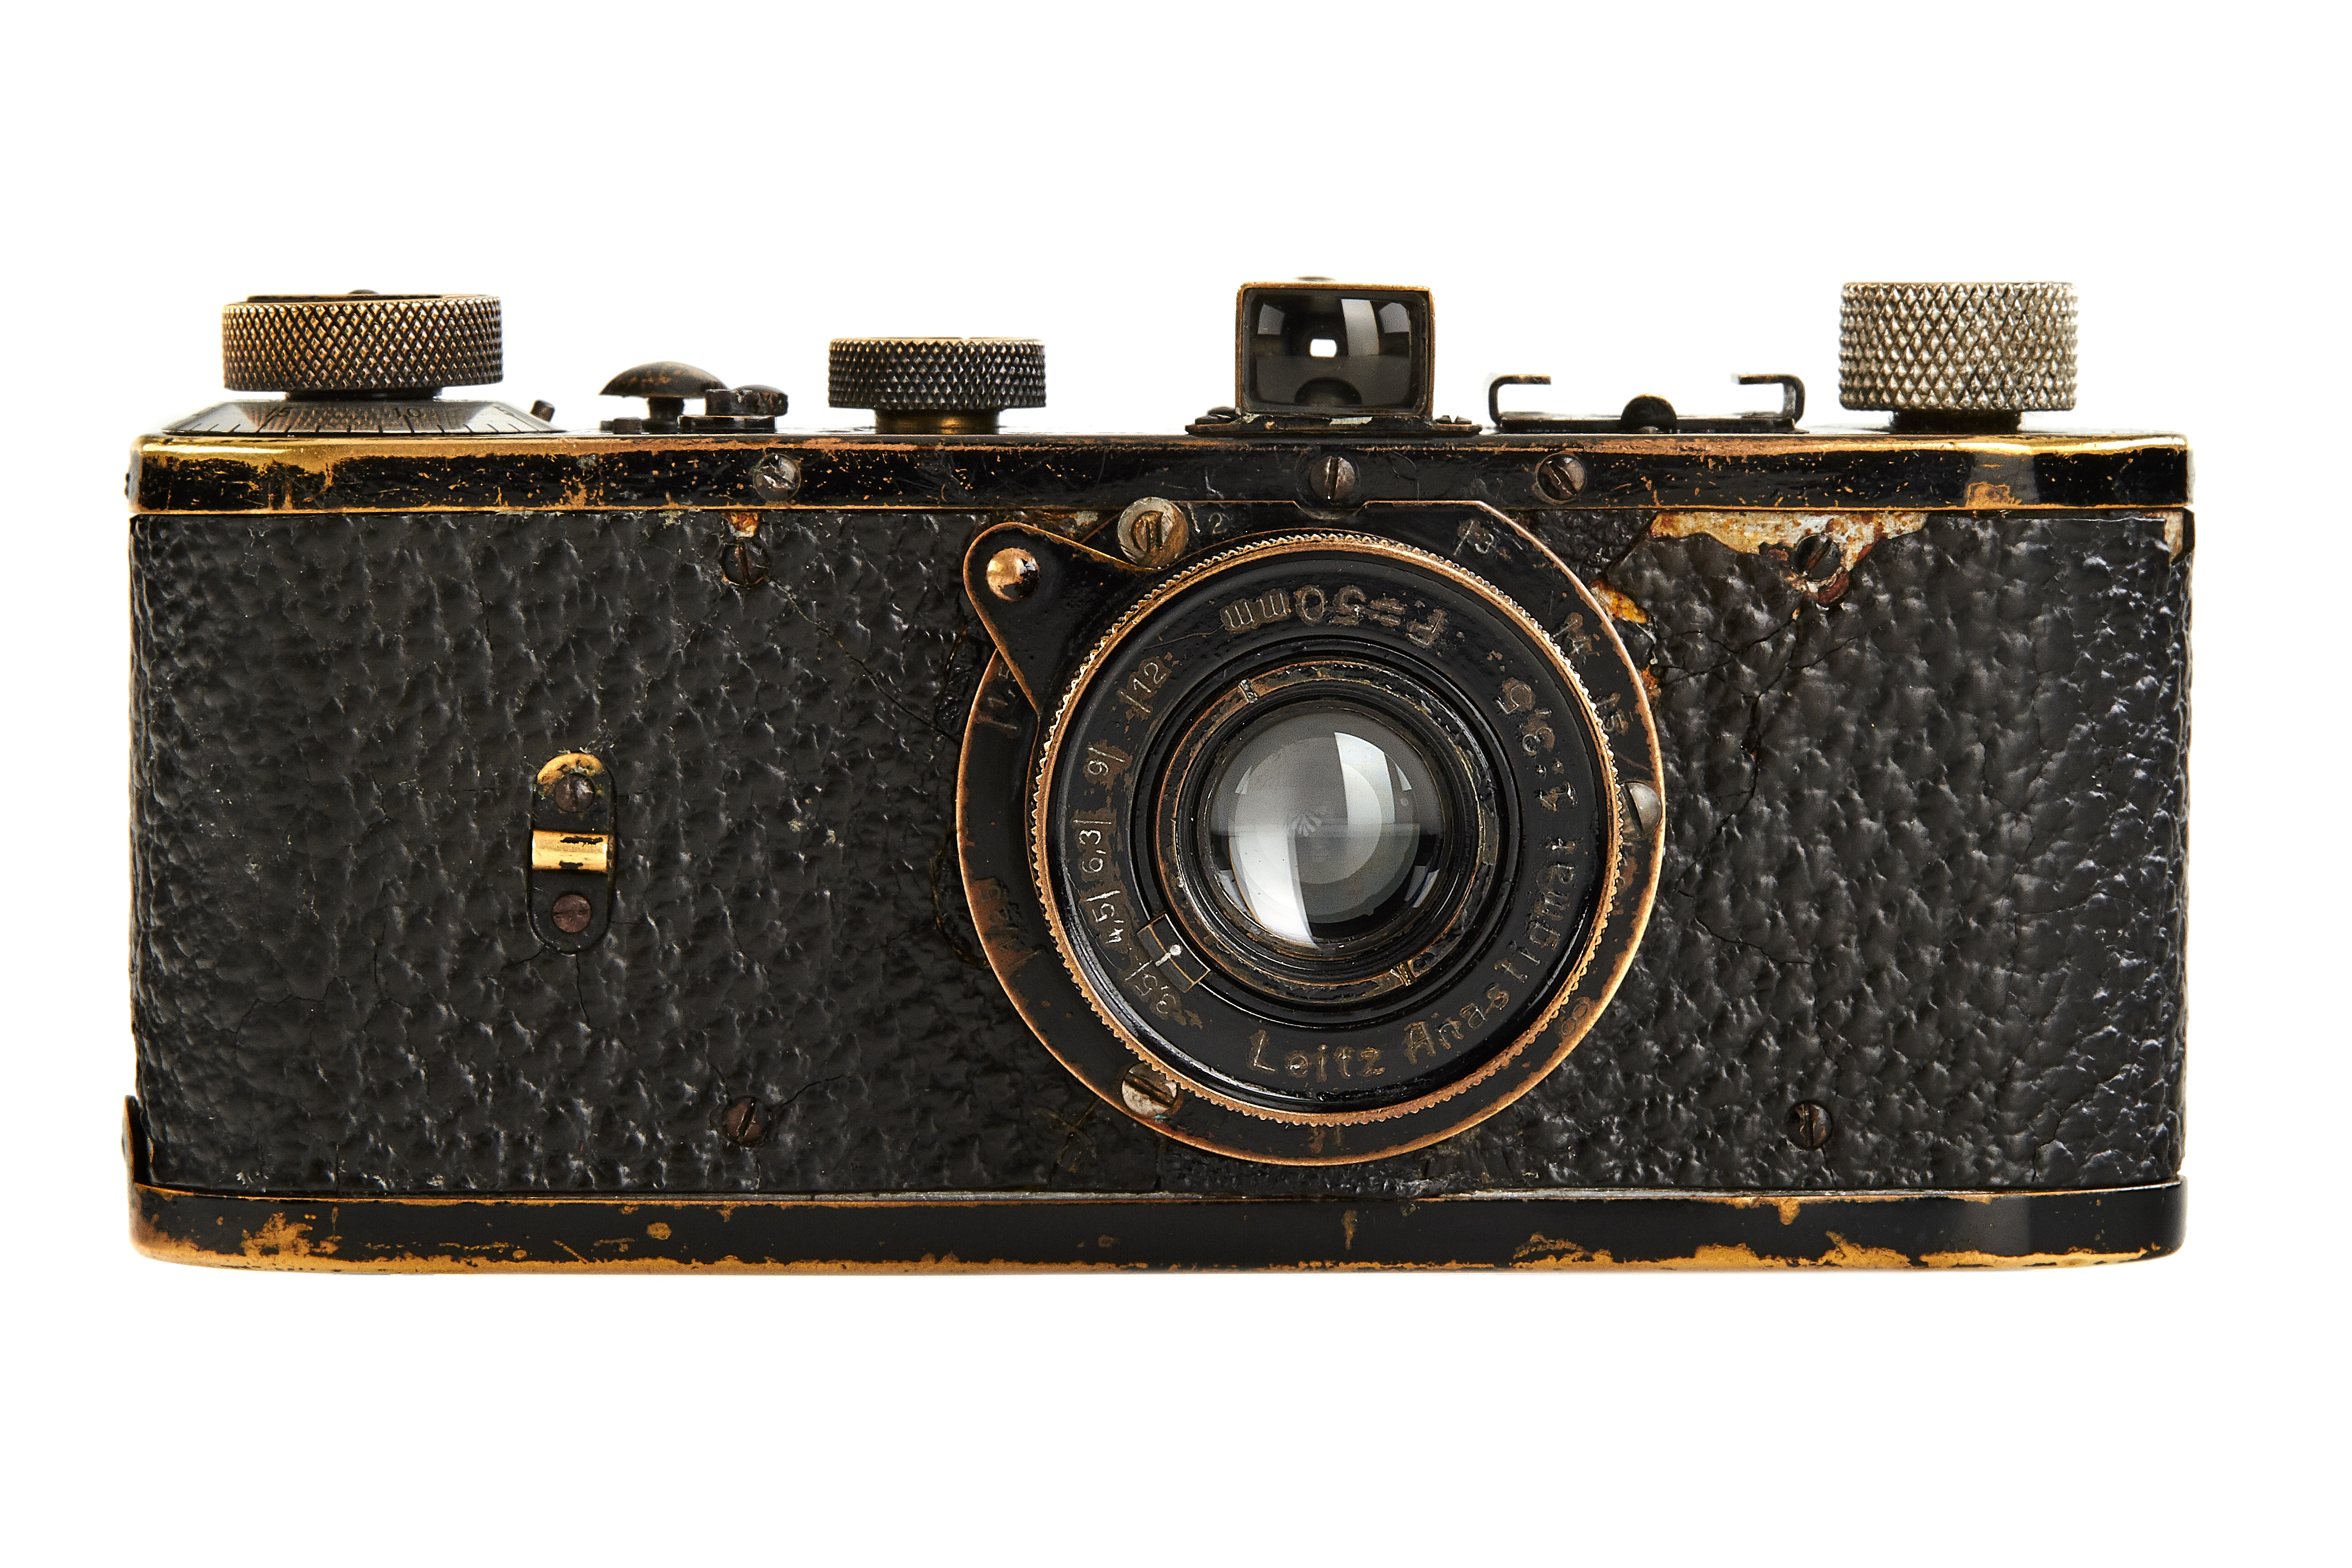 One of the Most Important and Rarest Leica Cameras to Be Auctioned